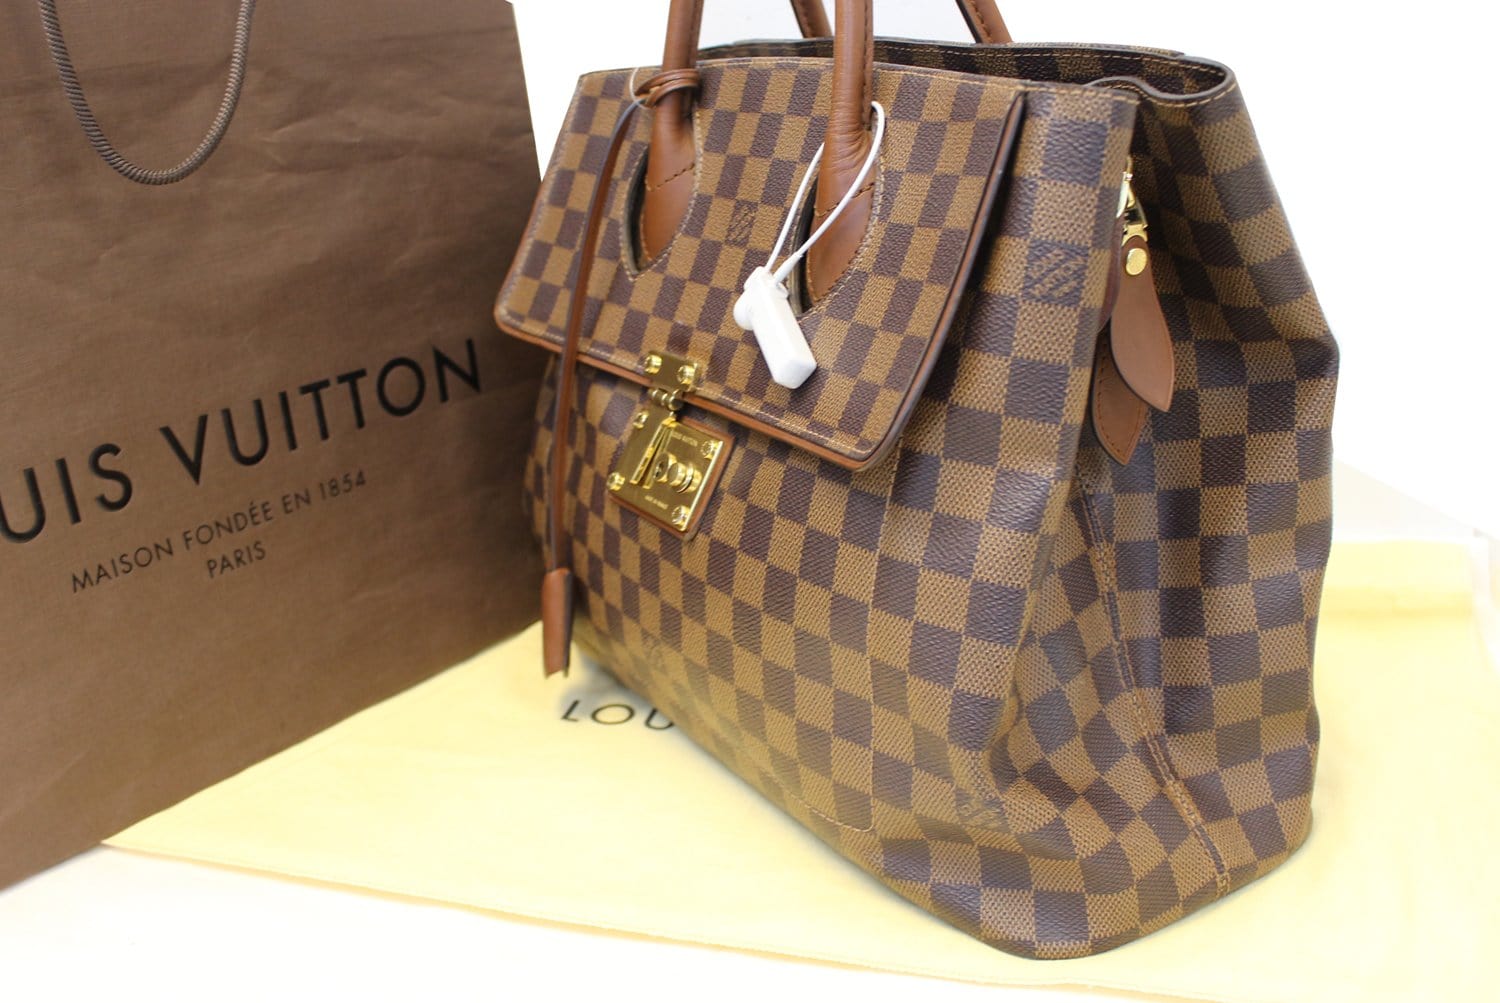 🎉SOLD 🎉LV ASCOT BRAND NEW  Bags, Louis vuitton bag, Brand new